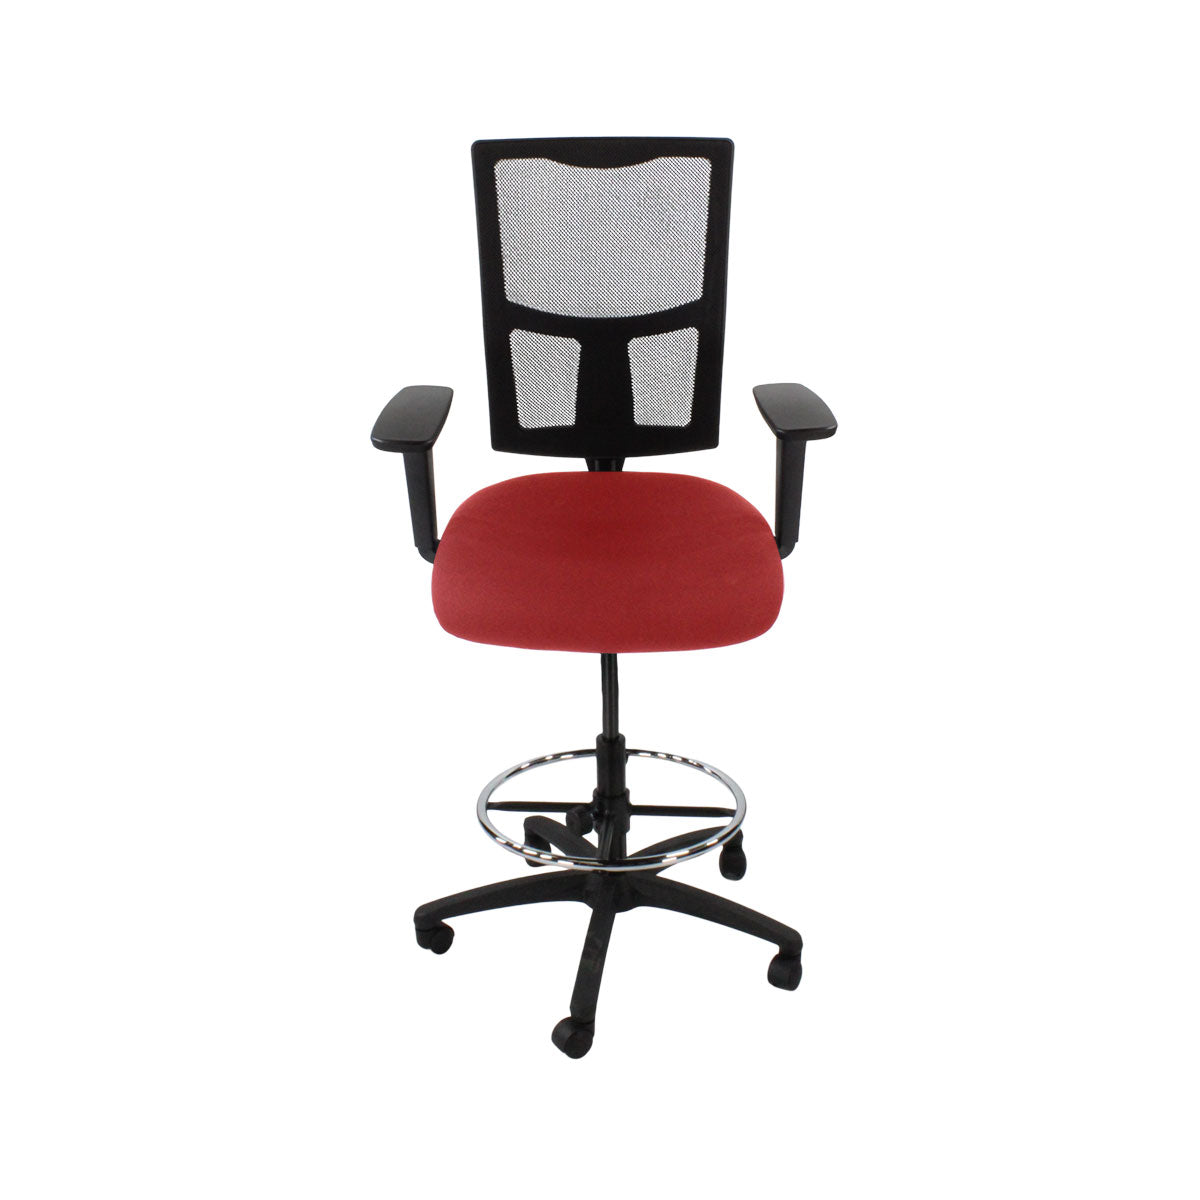 TOC: Ergo 2 Draughtsman Chair in Red Fabric - Refurbished